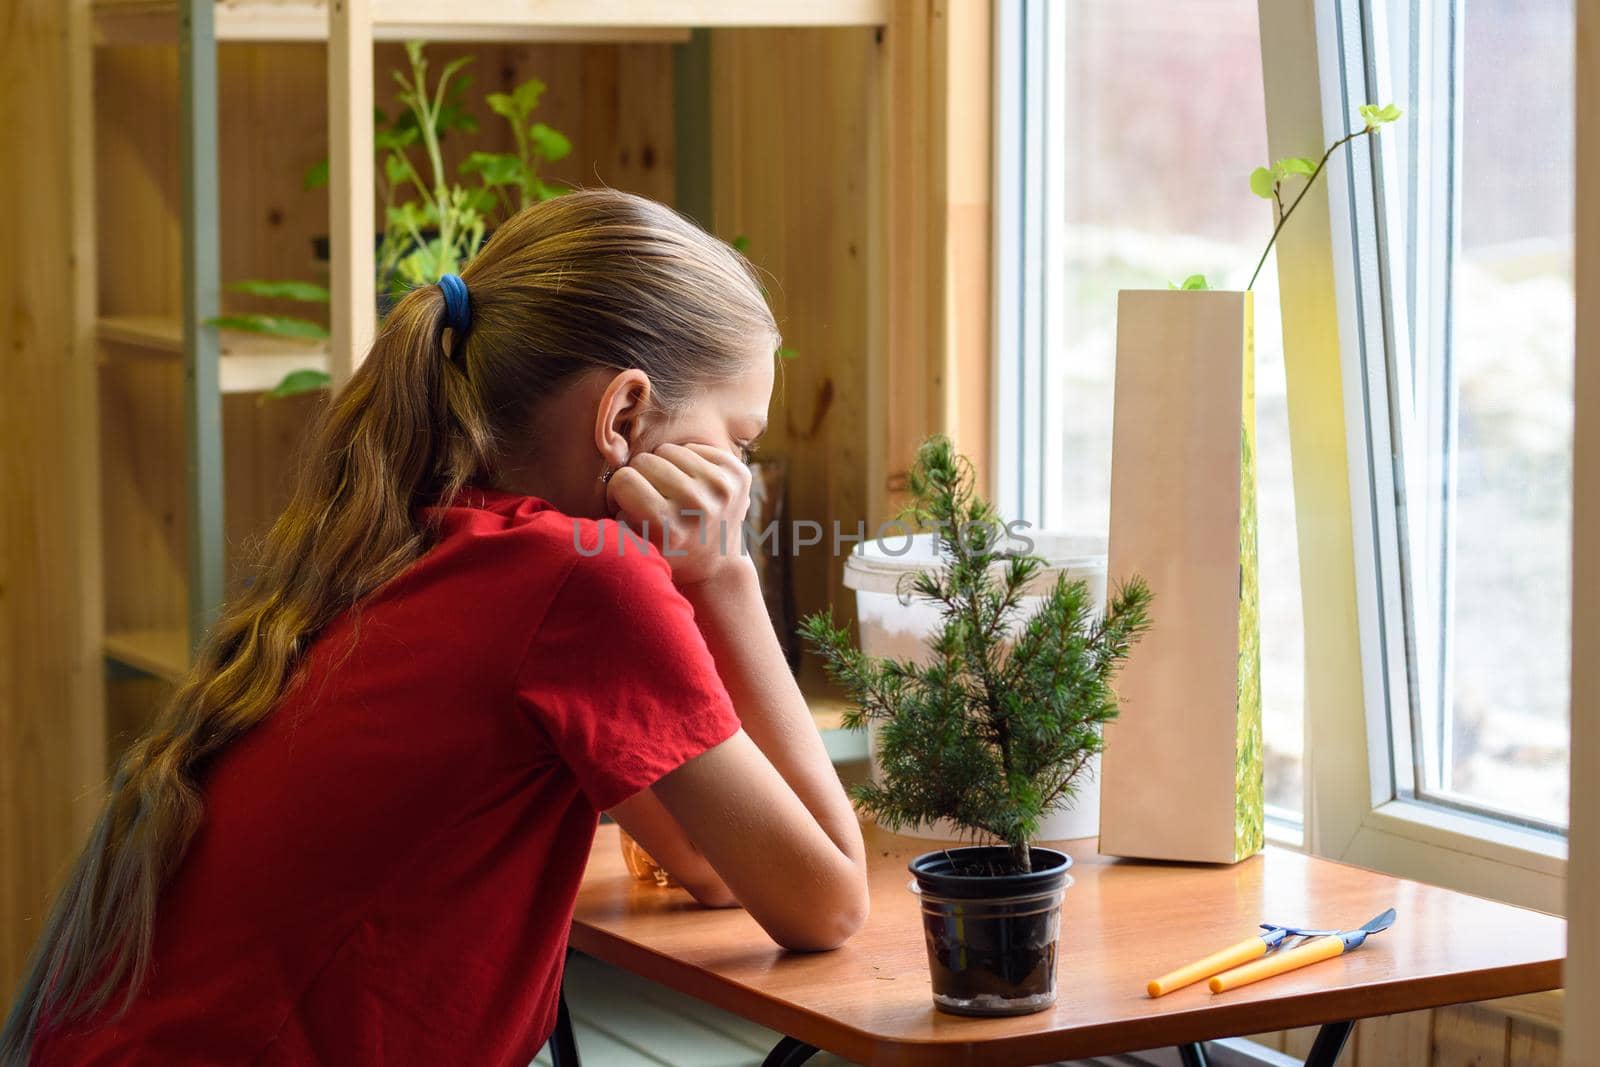 A girl sits by the window at a table on which there are garden plants and is waiting for spring by Madhourse